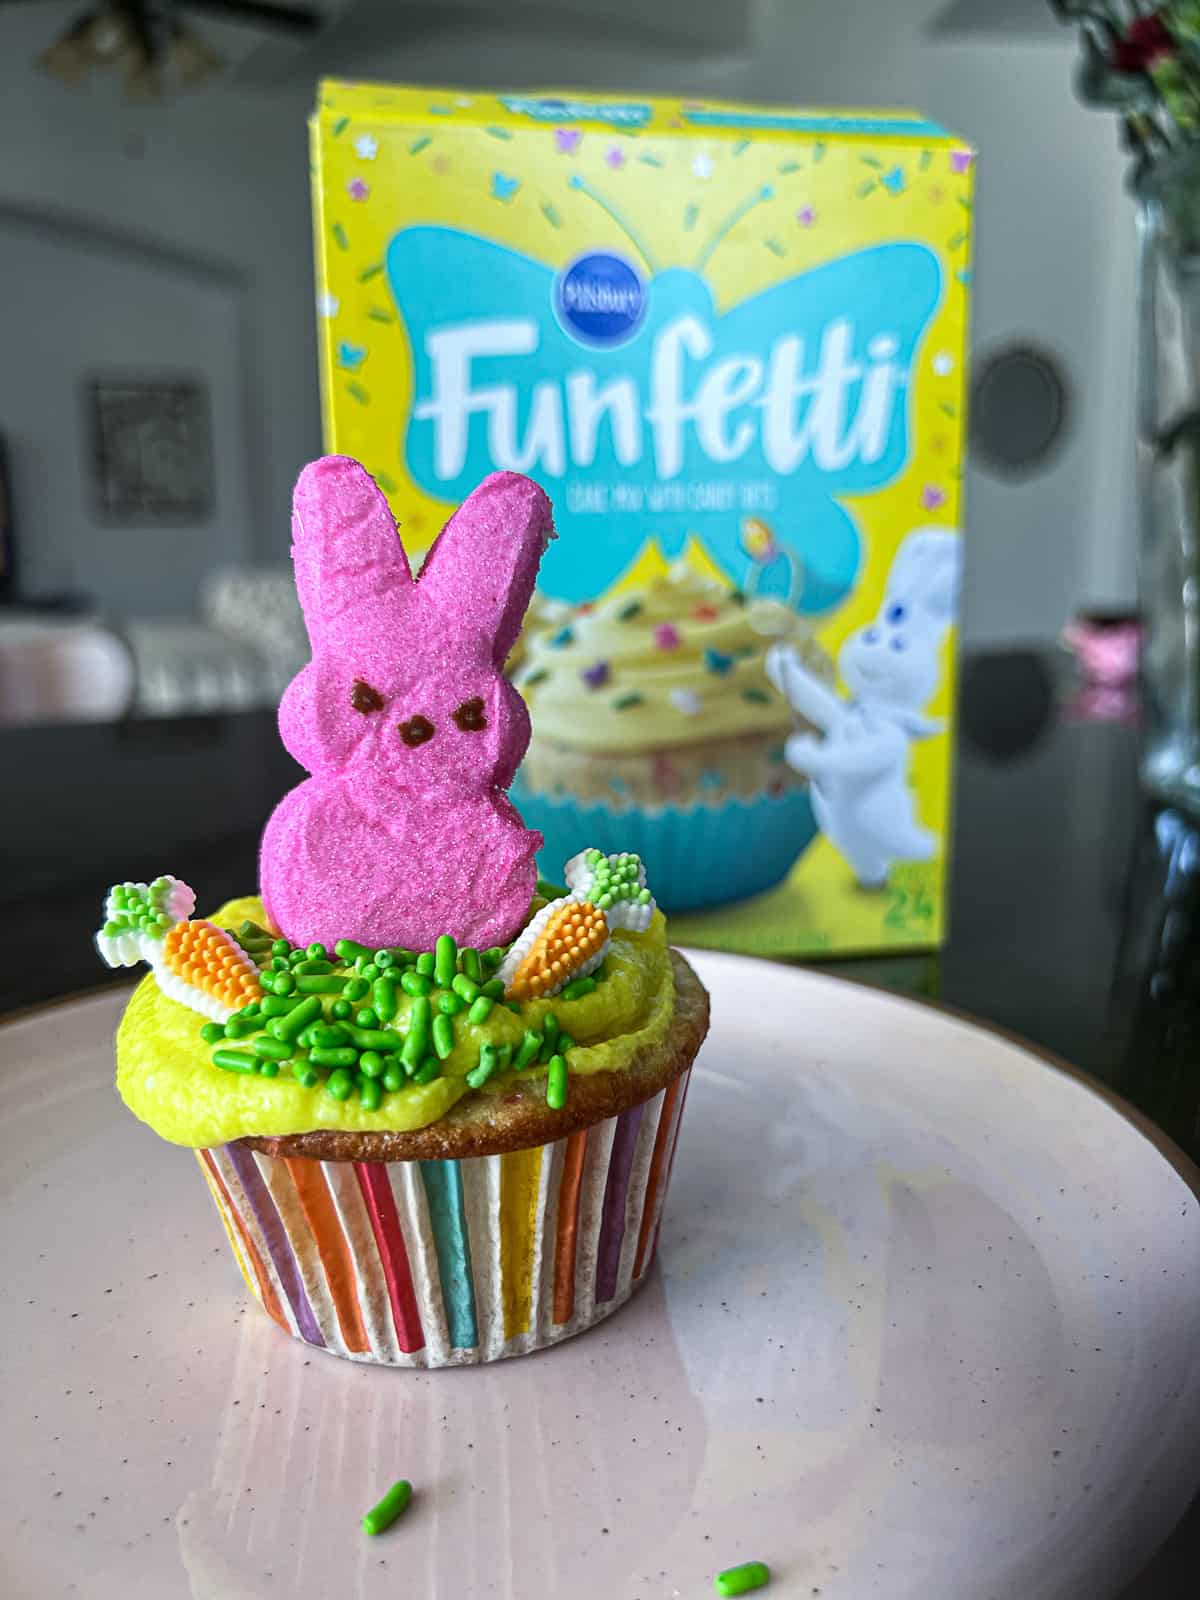 Bunny Topped Easter Funfetti Cupcakes with box mix in background